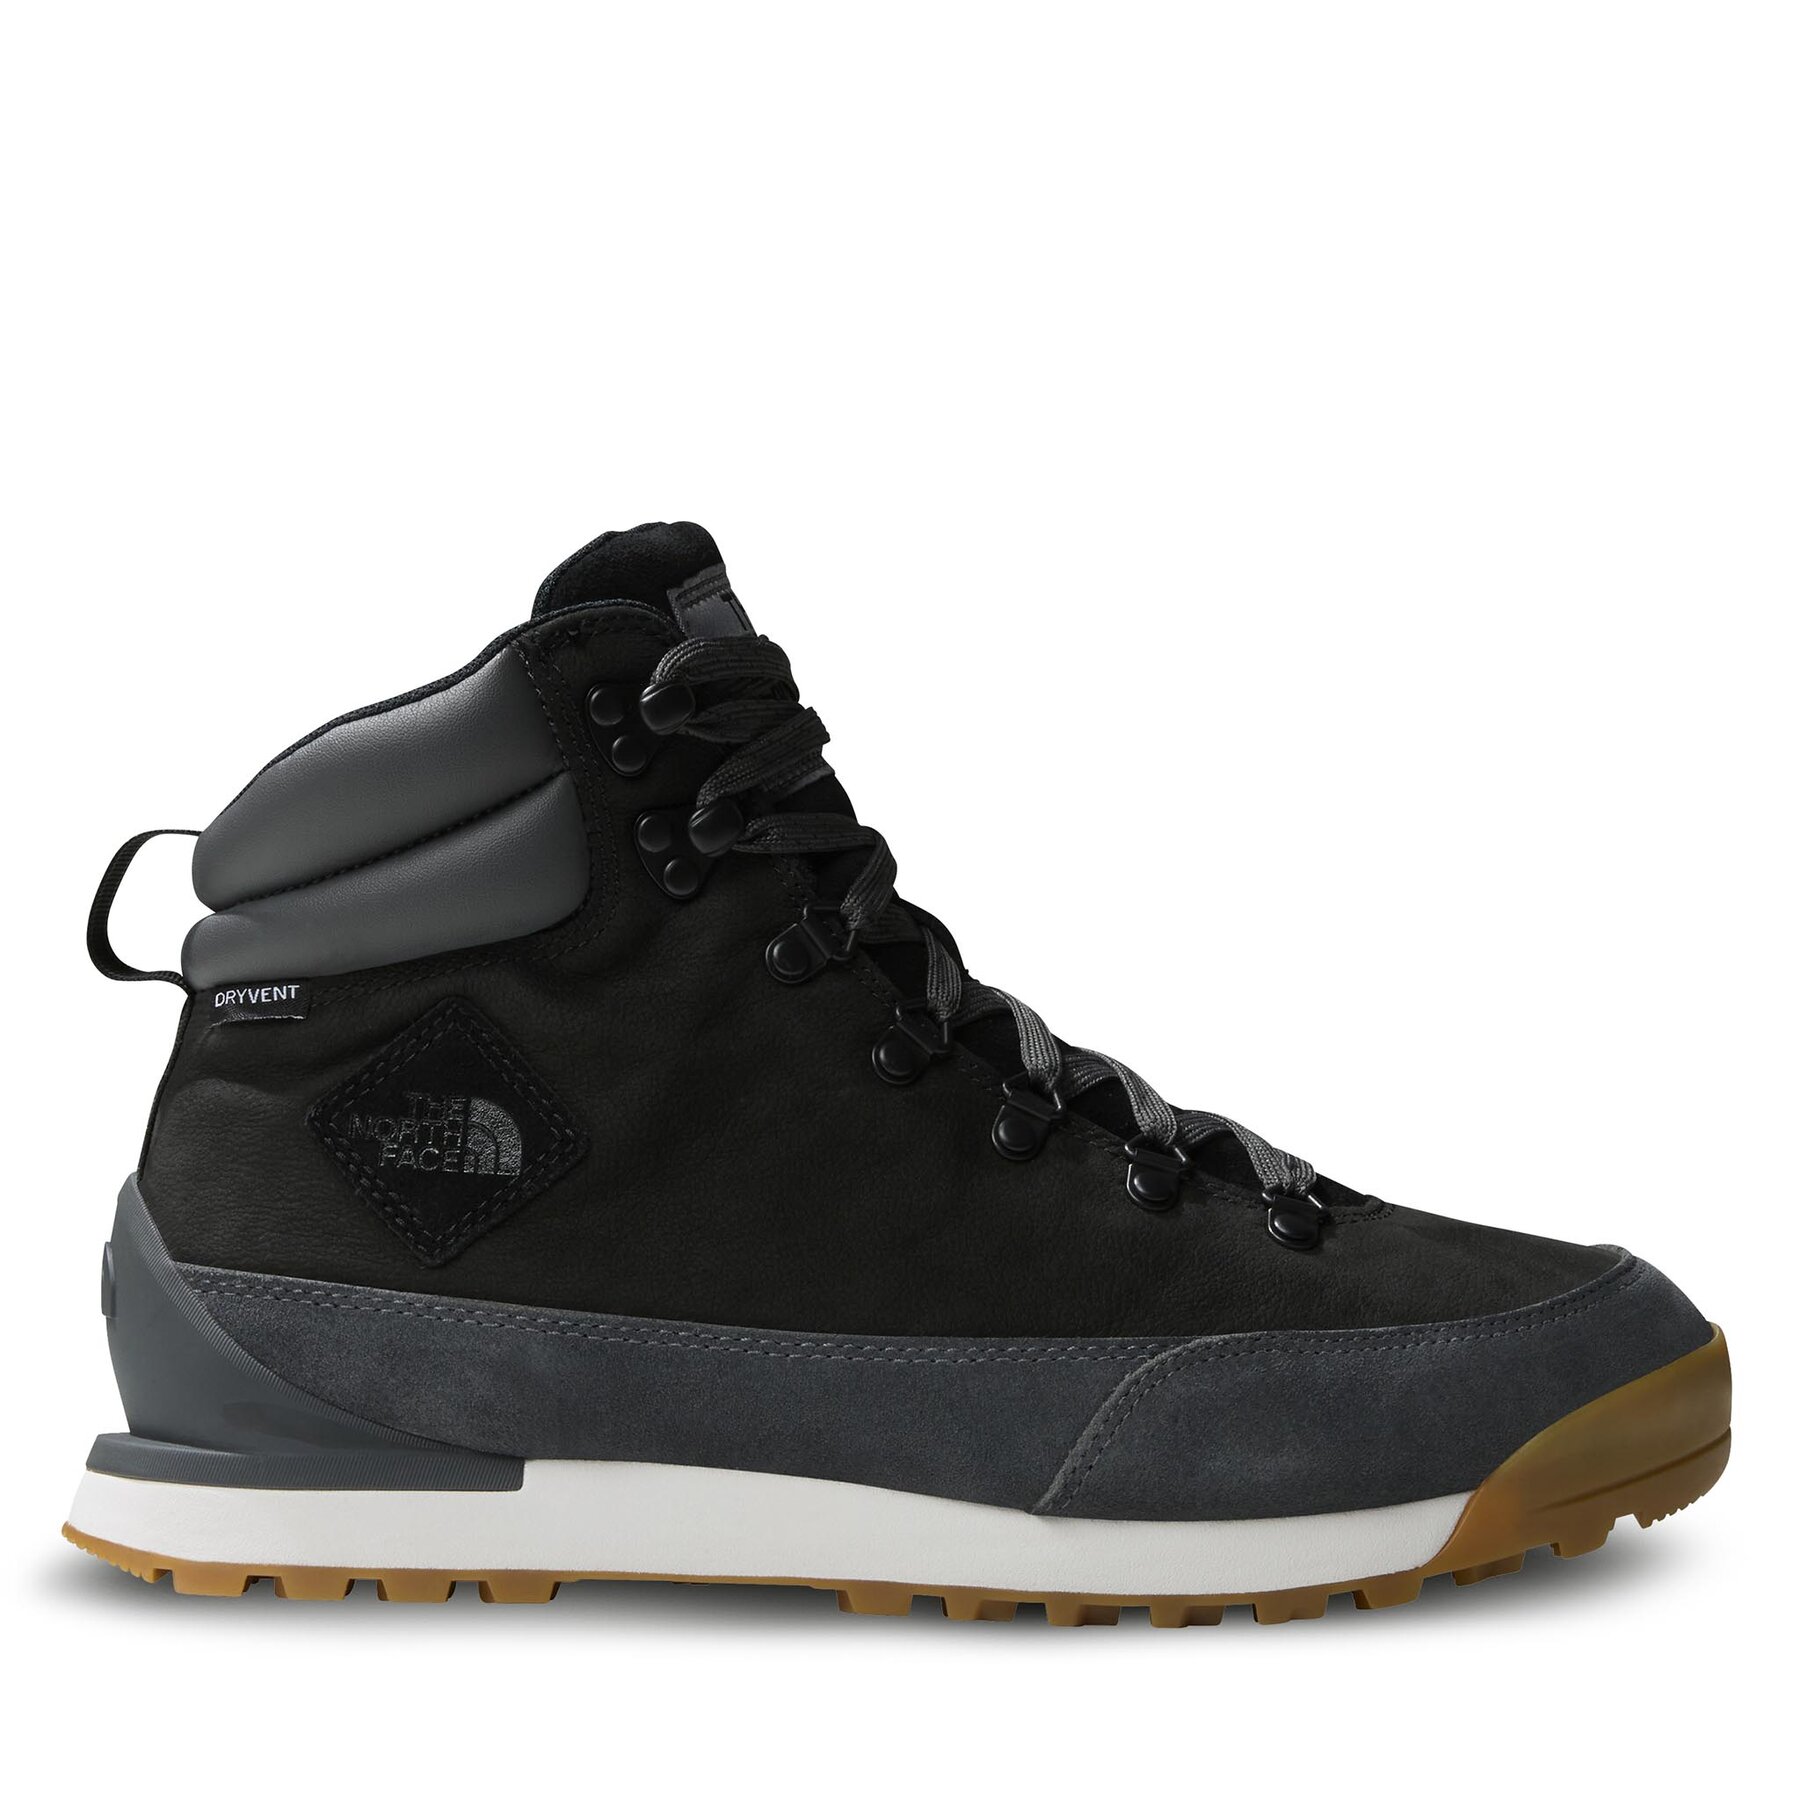 Trekkingschuhe The North Face M Back-To-Berkeley Iv Leather WpNF0A817QKT01 Tnf Black/Asphalt Grey von The North Face